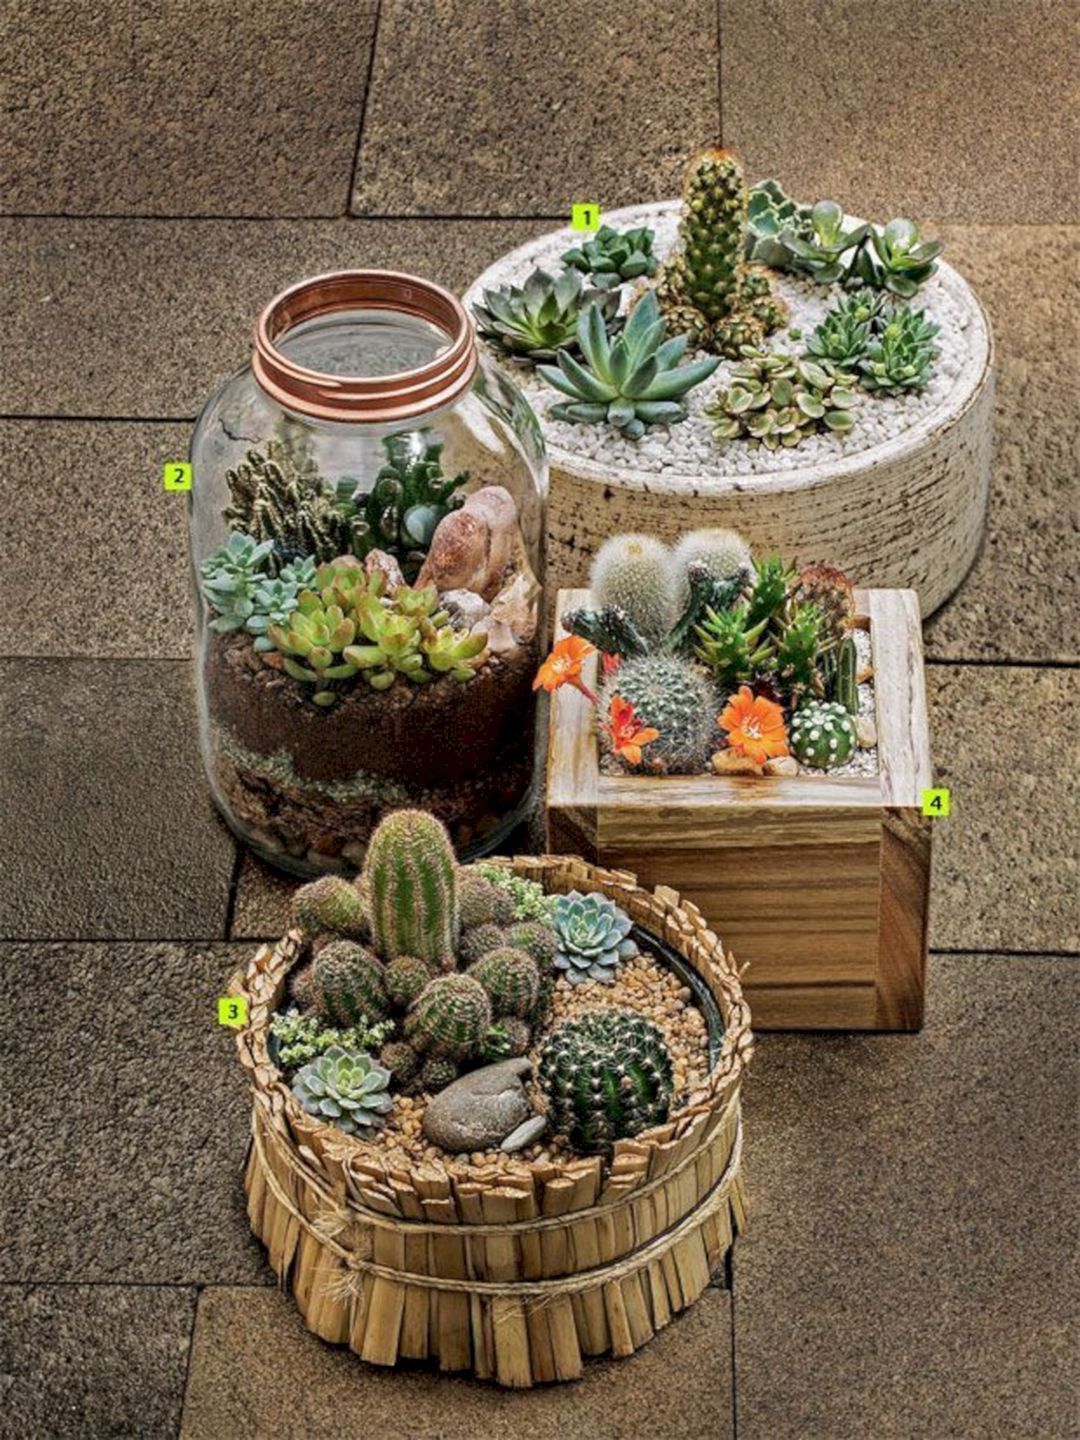 Awesome Indoor And Outdoor Cactus Garden Ideas No 04 — Design & Decorating -   14 plants Cactus awesome ideas